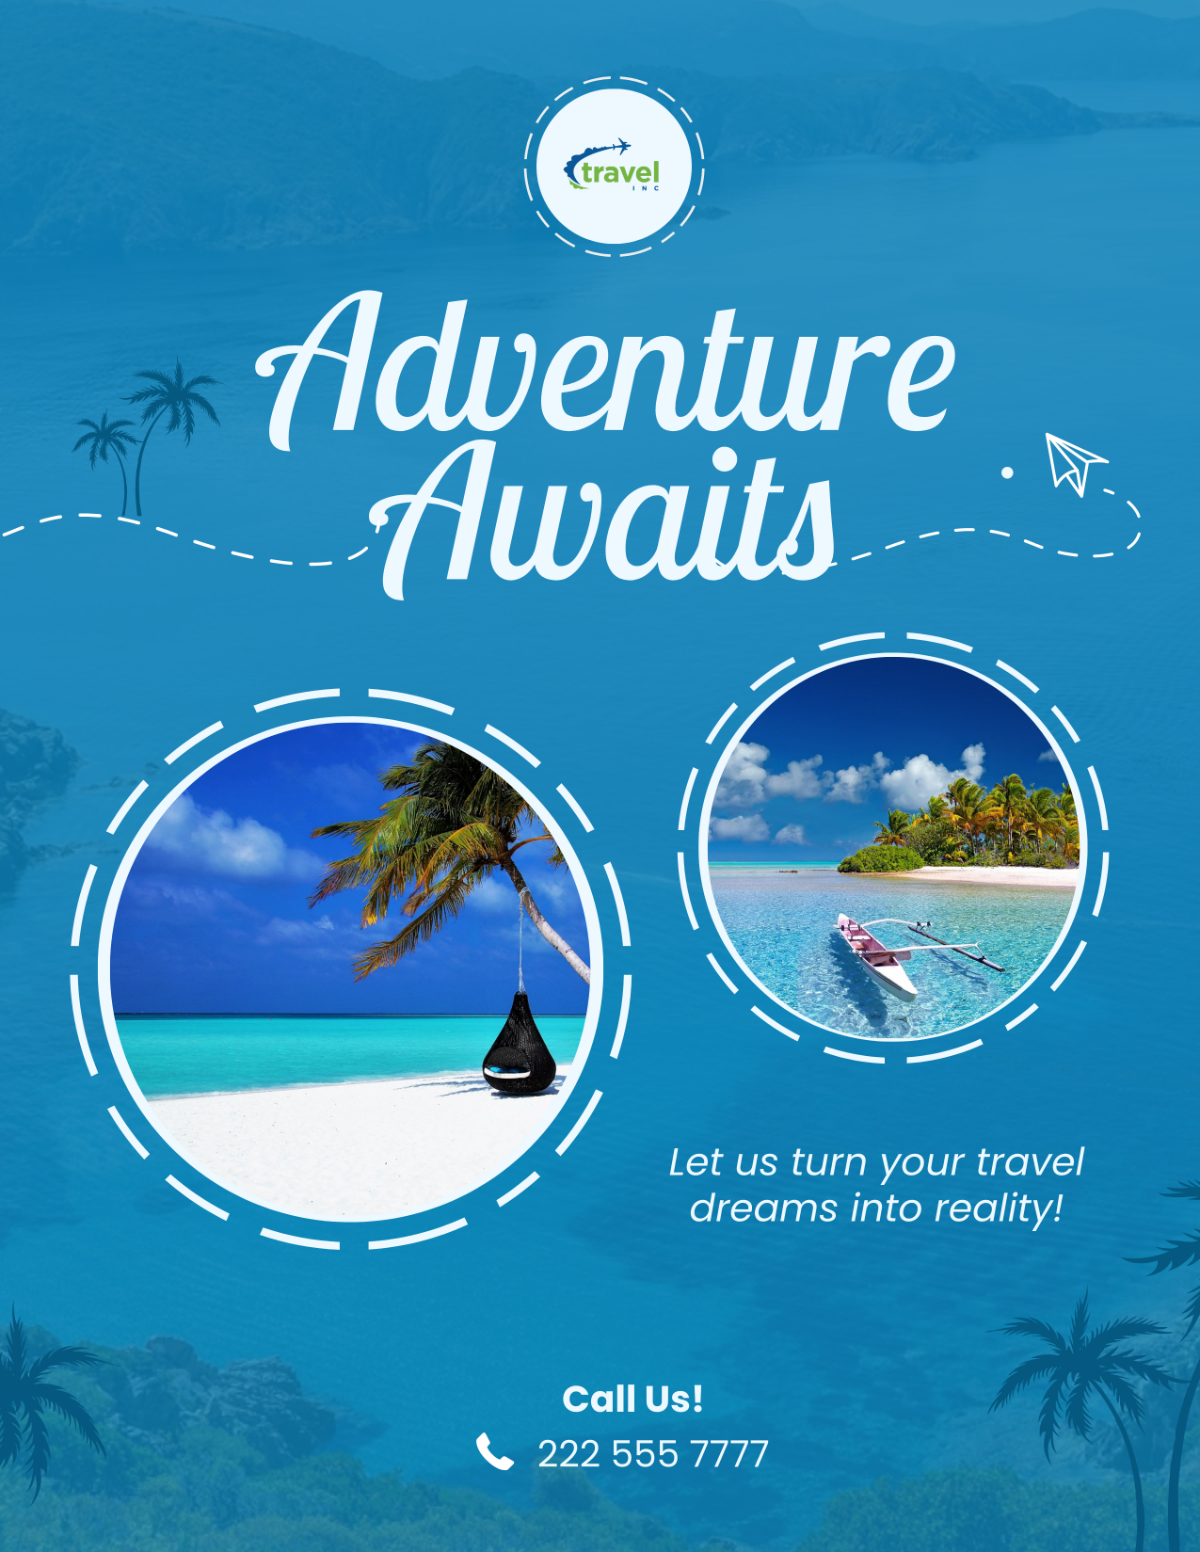 Free Travel Agency Marketing Flyer Template